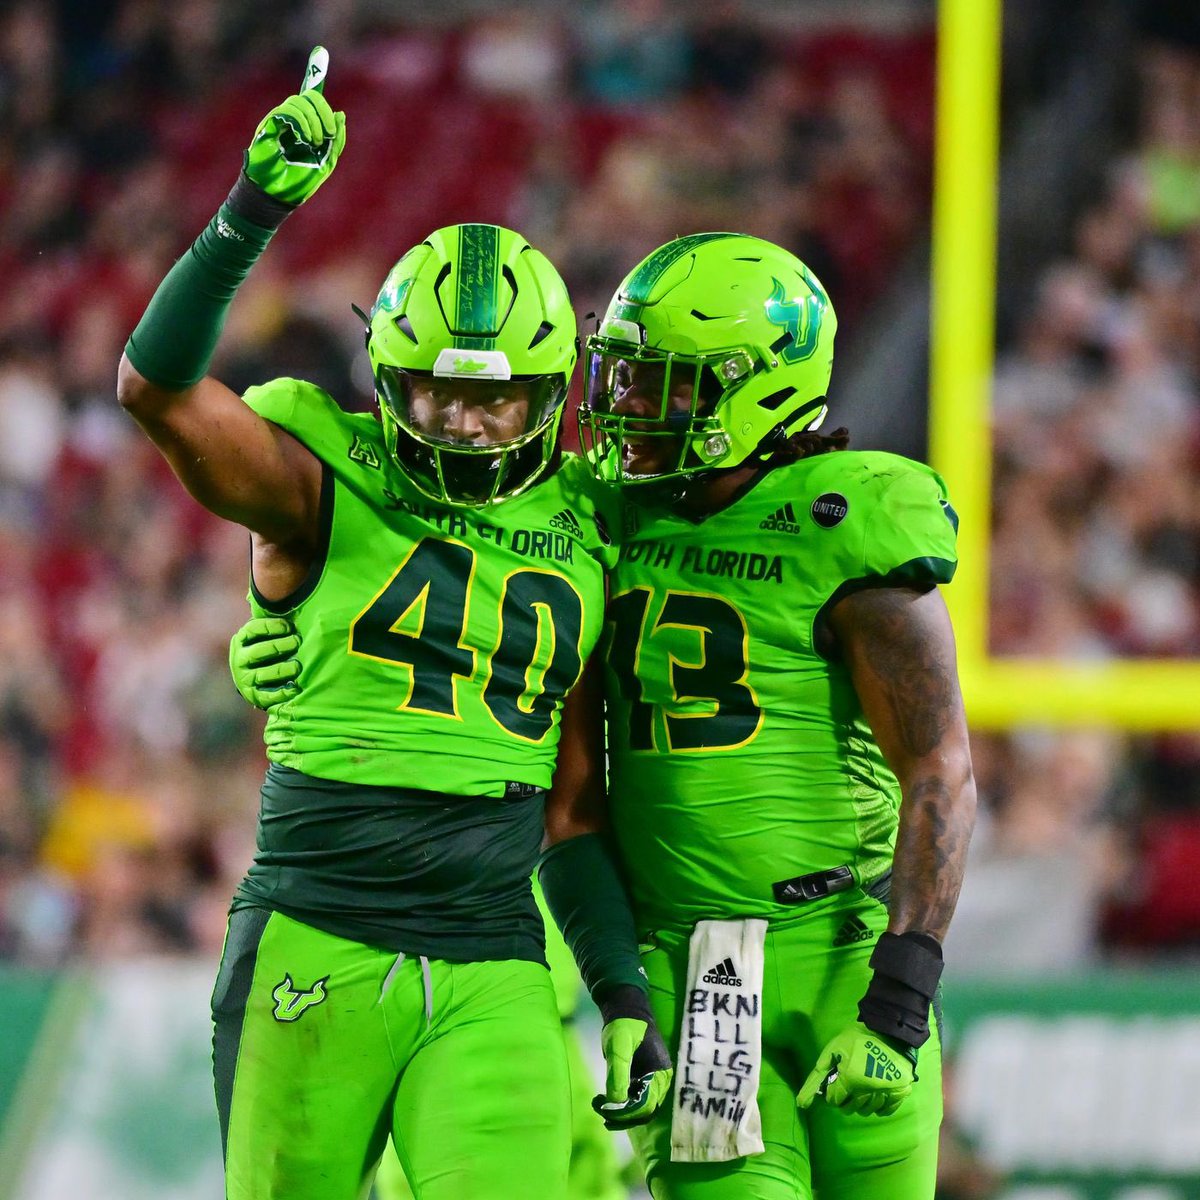 #AGTG Blessed to recieve an offer from @USFFootball ‼️ @CoachHoodie @DLineKP @CoachGolesh @trenchmenAC @JeffConawayTFA @Royals__FB @jamaalgelsey3 @RivalsFriedman @adamgorney @SWiltfong247 @JeremyO_Johnson @ChadSimmons_ @AndrewIvins @CoachSimmonsSC